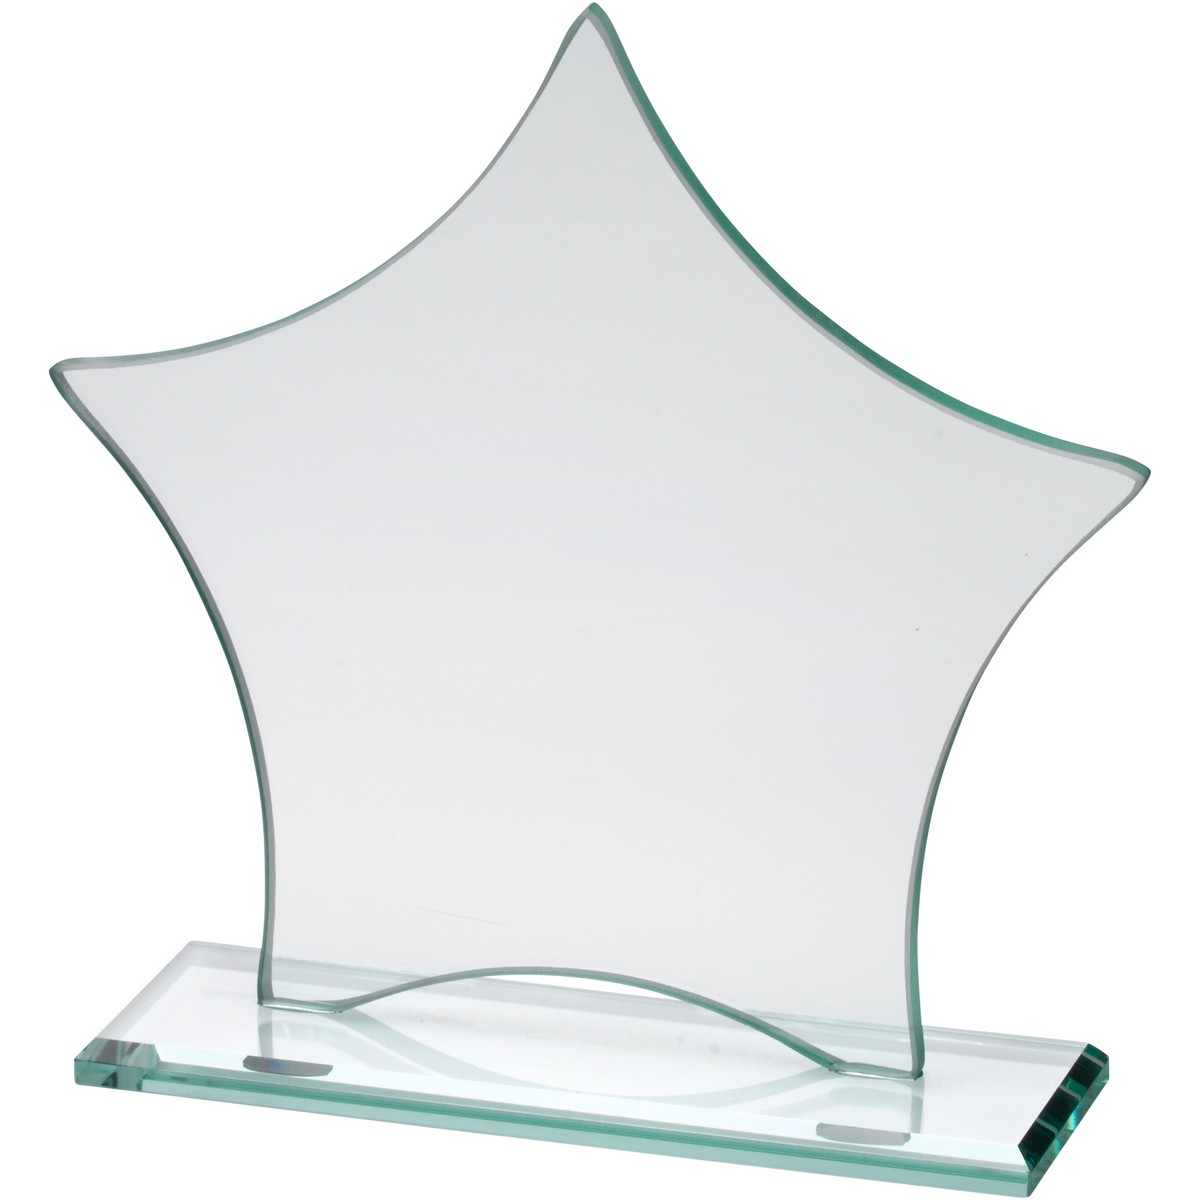 JADE GLASS STAR PLAQUE (6MM THICK)